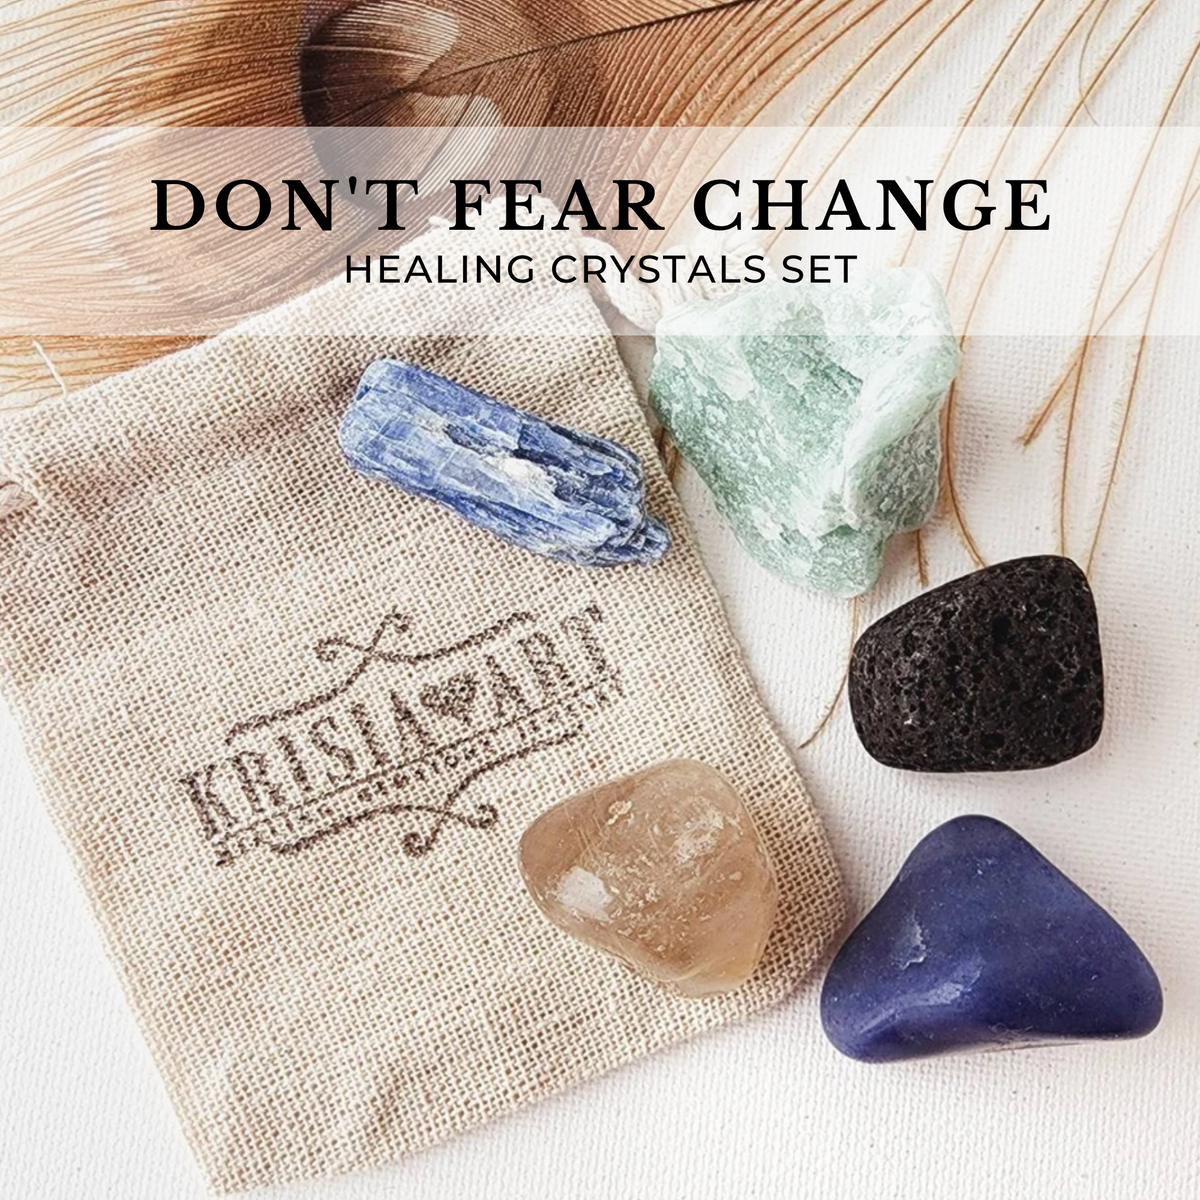 DON'T FEAR CHANGE healing crystals set for new beginnings, calming anxiety, new start in life & manifesting intentions. Blue Aventurine, Green Aventurine, Blue Kyanite, Lava Stone, Rutilated Quartz